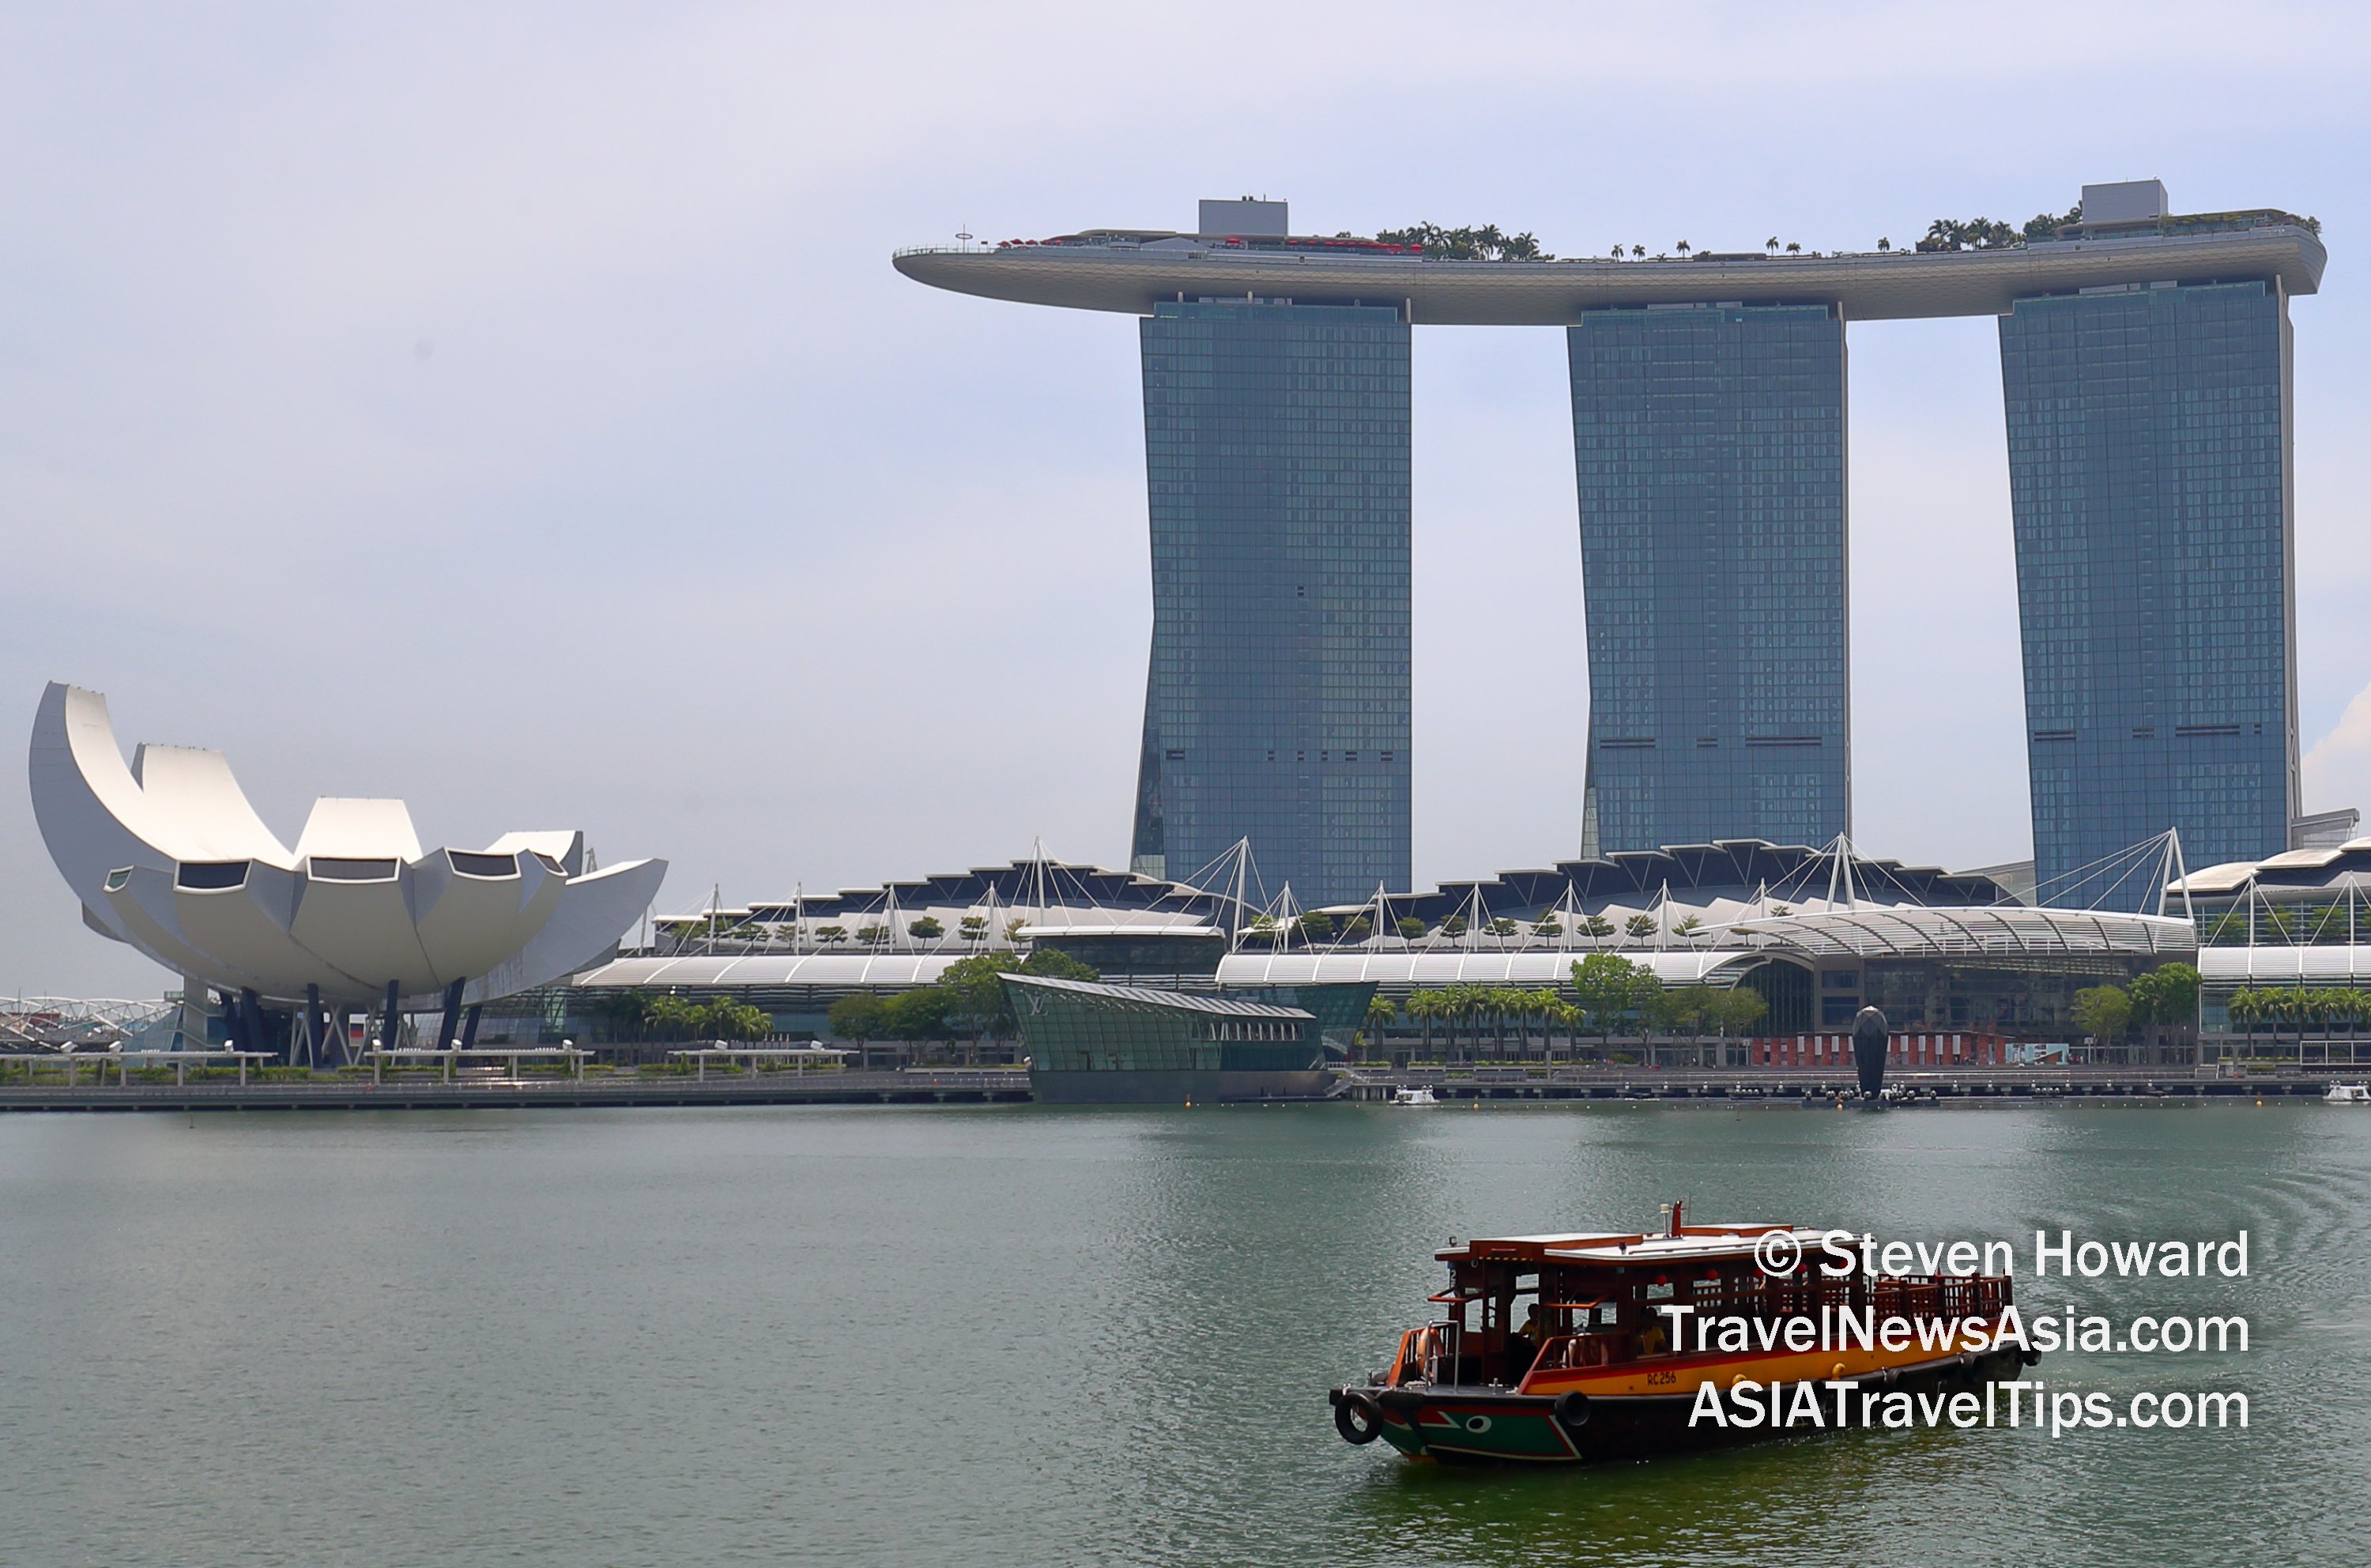 Marina Bay Sands in Singapore. Picture by Steven Howard of TravelNewsAsia.com. Click to enlarge.